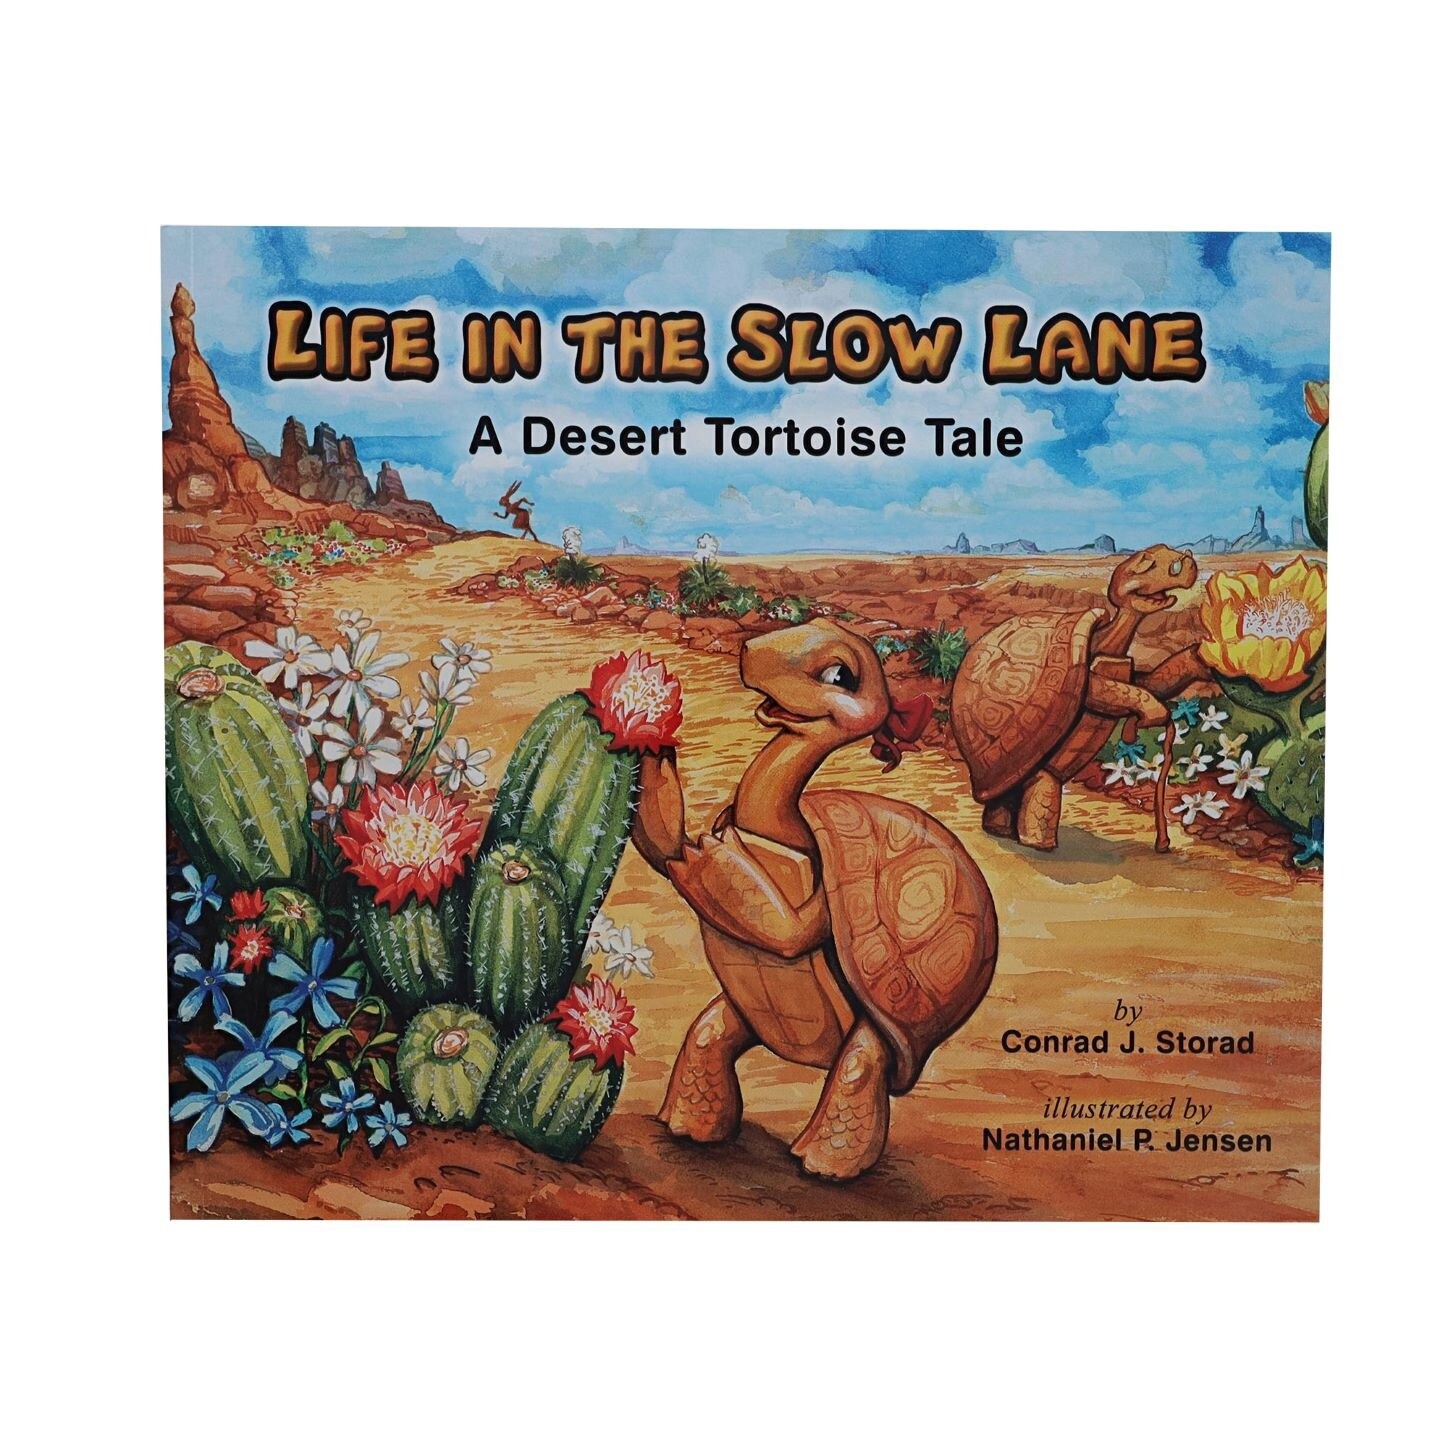 Life in the Slow Lane by Conrad J. Storad